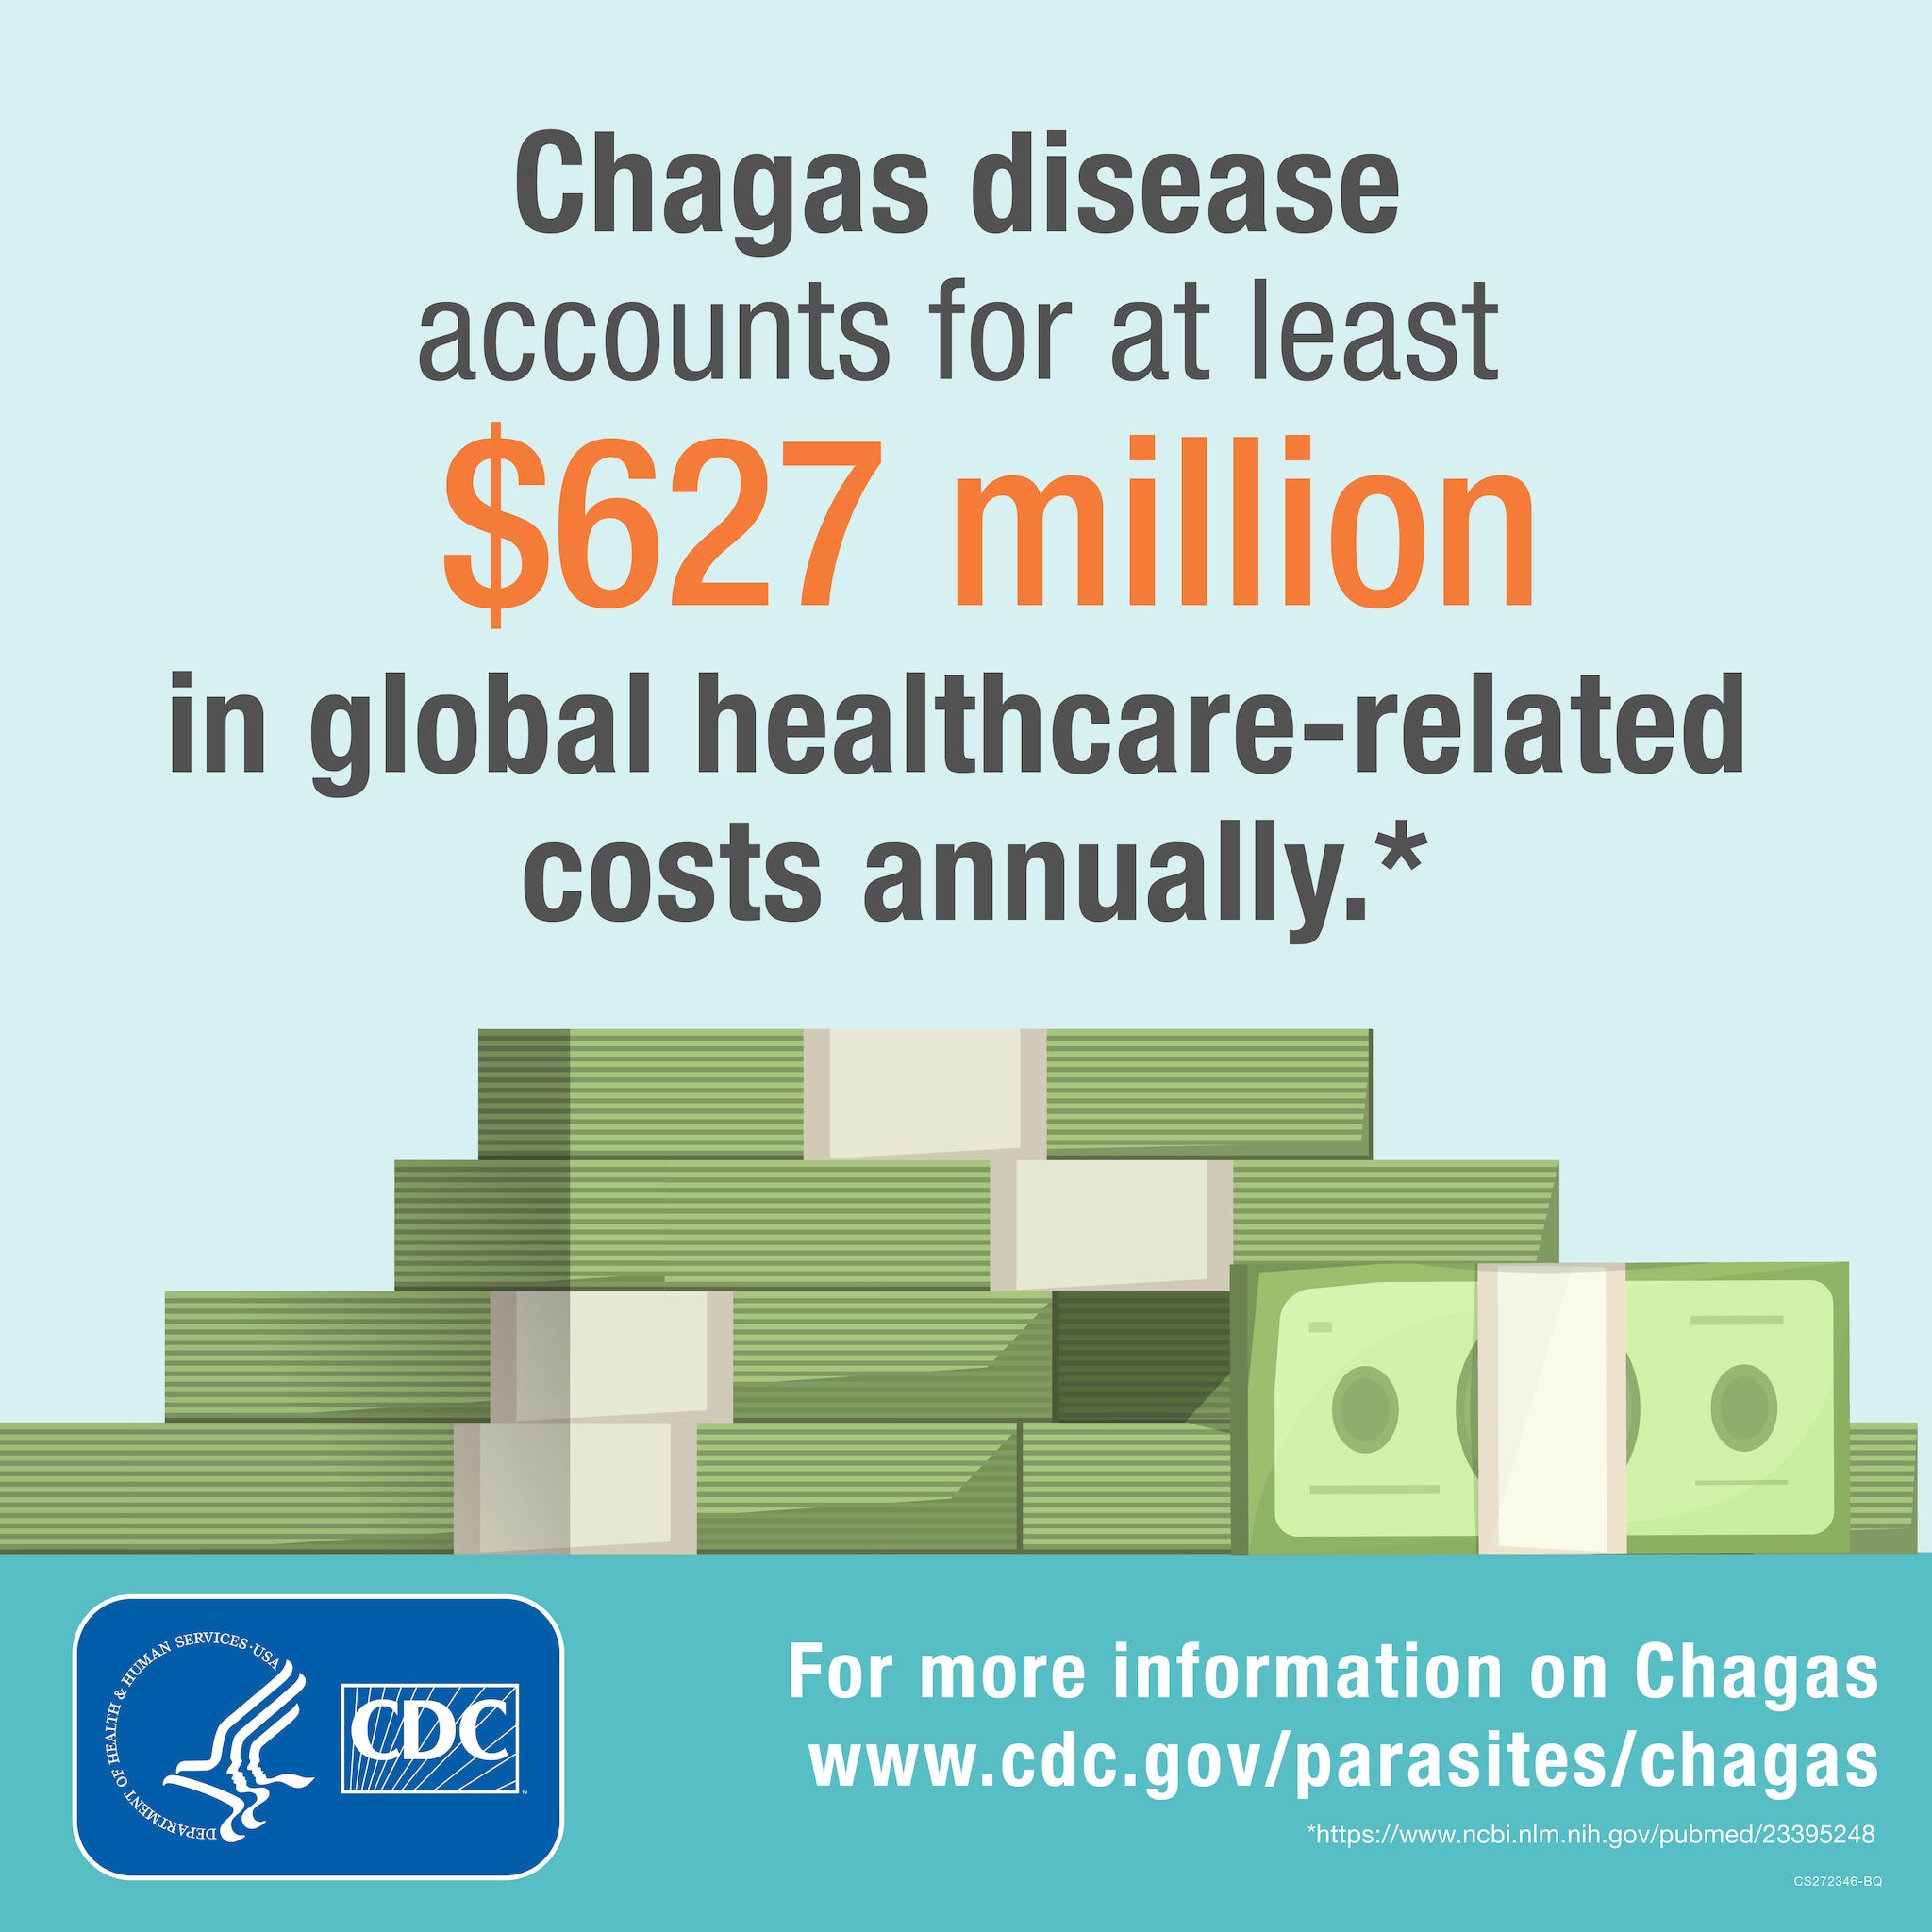 Chagas disease accounts for at least $627 million in global healthcare-related cost annually.